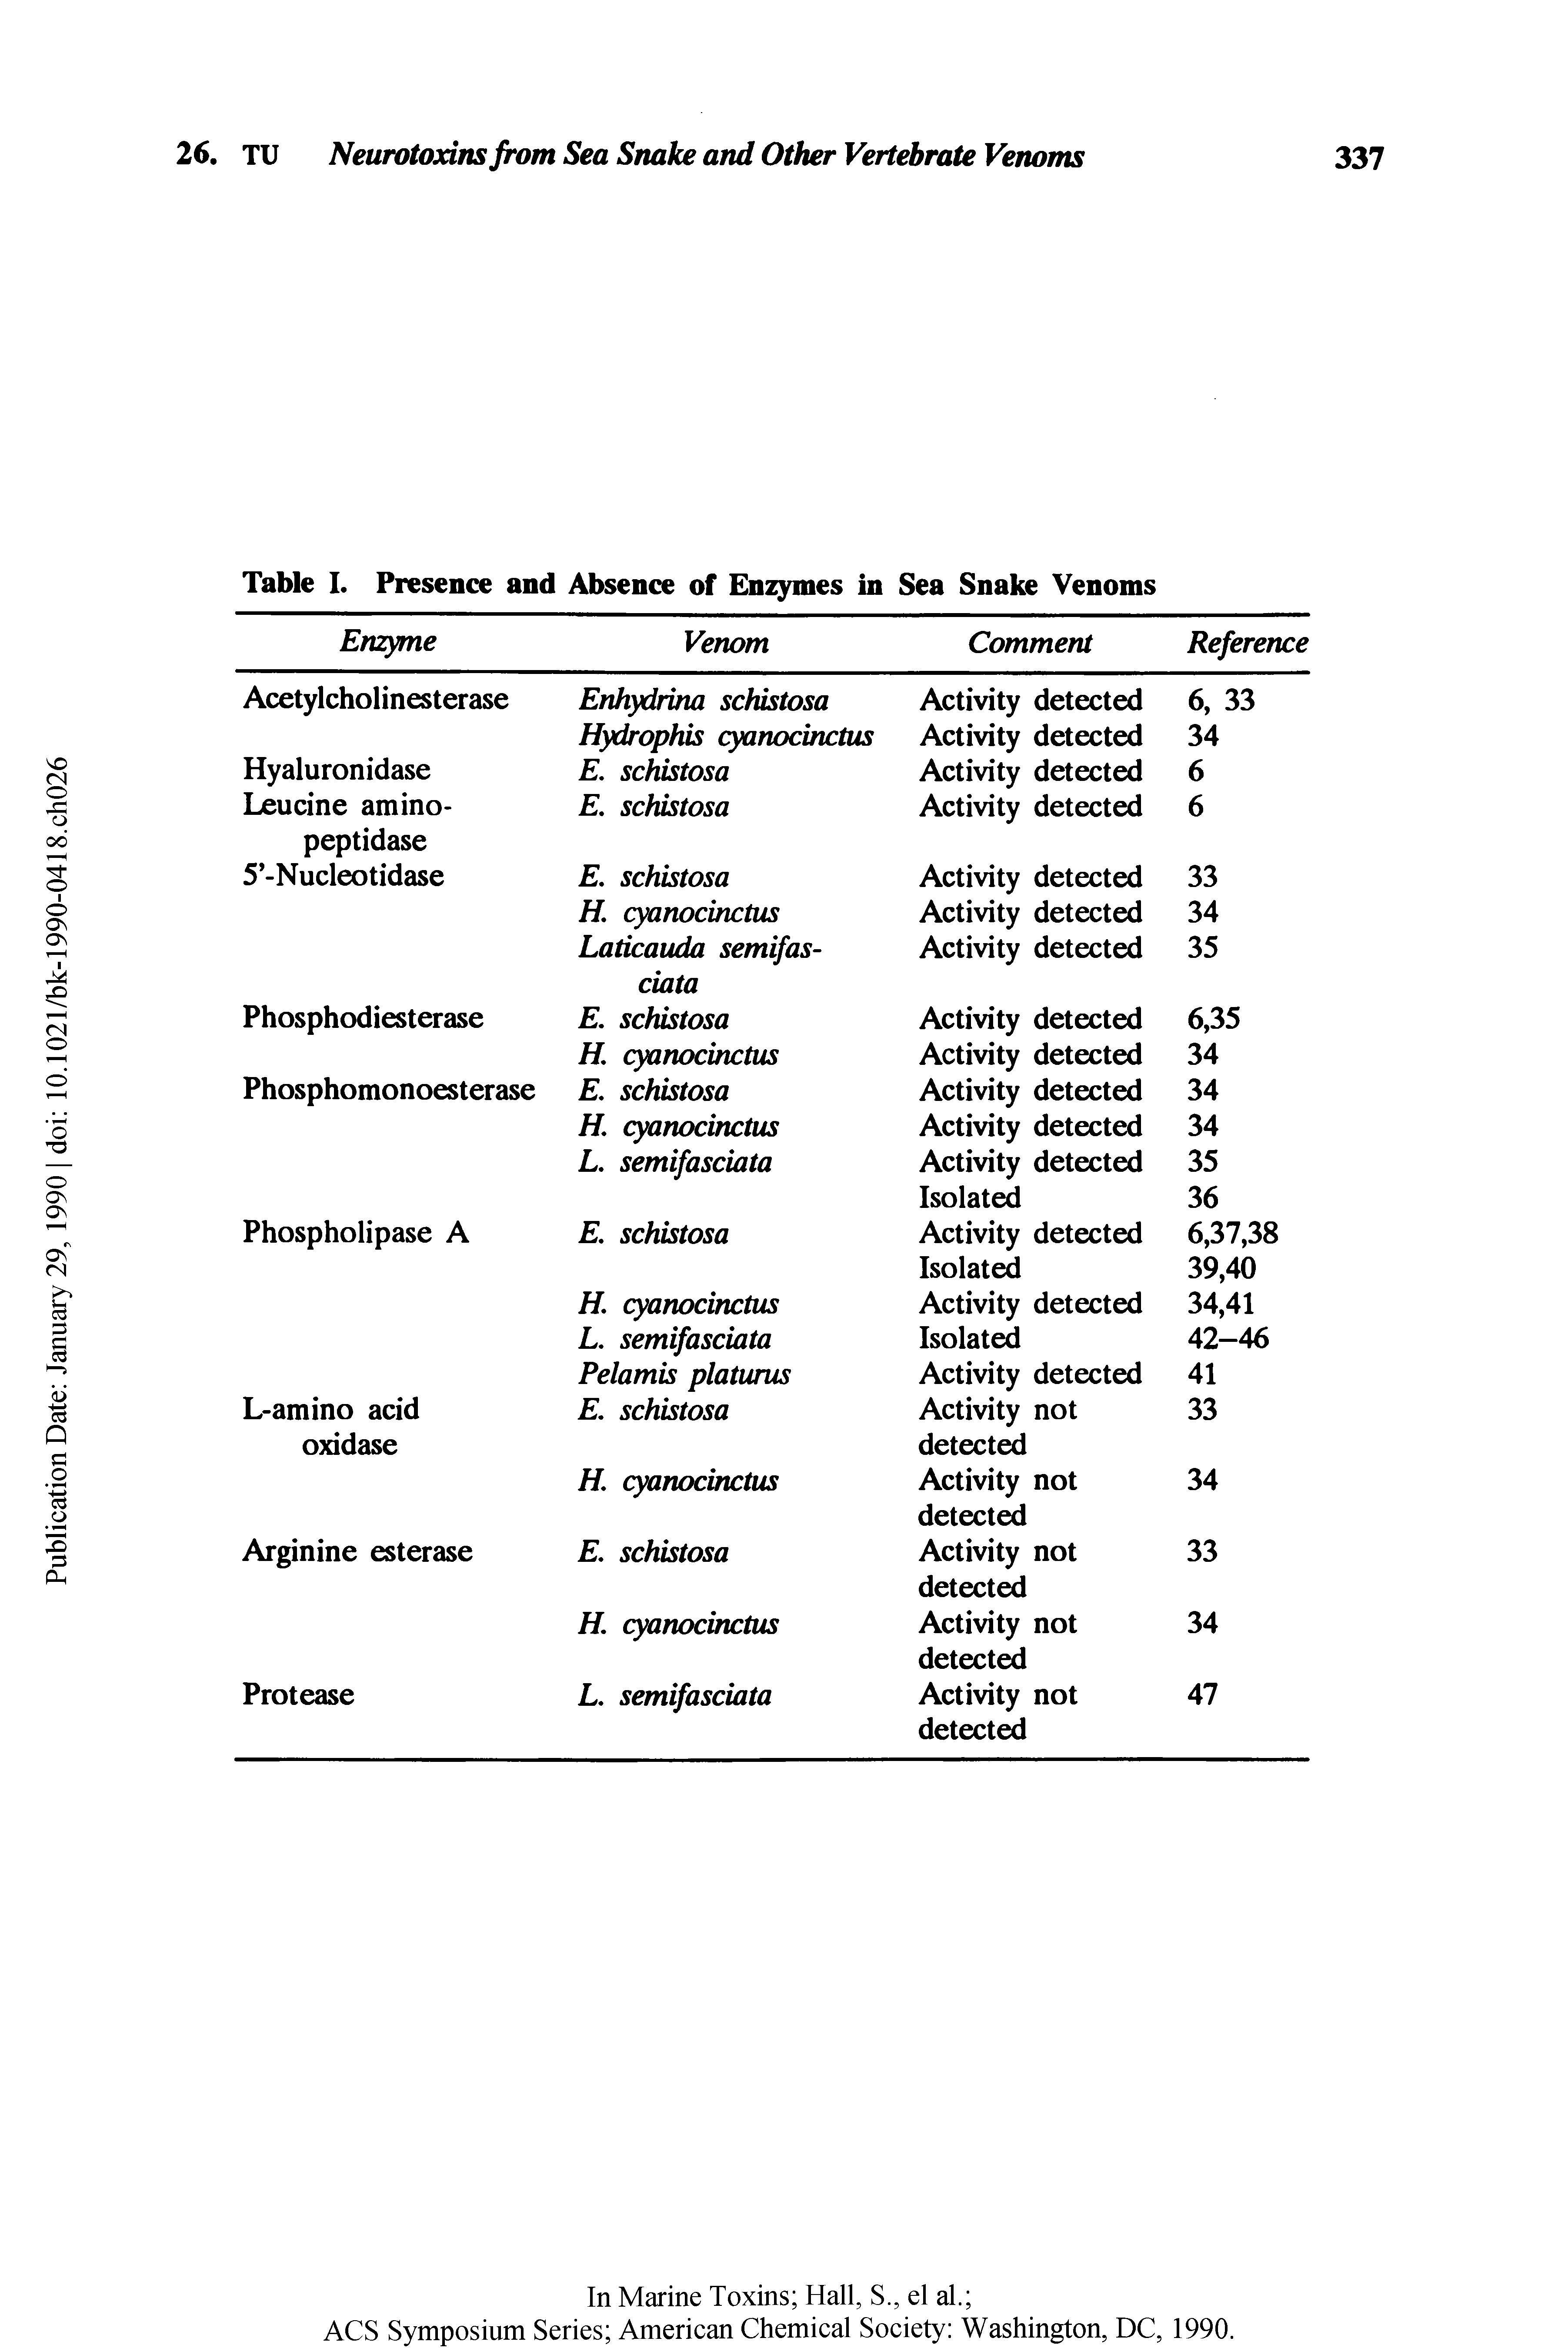 Table I. Presence and Absence of Enzymes in Sea Snake Venoms...